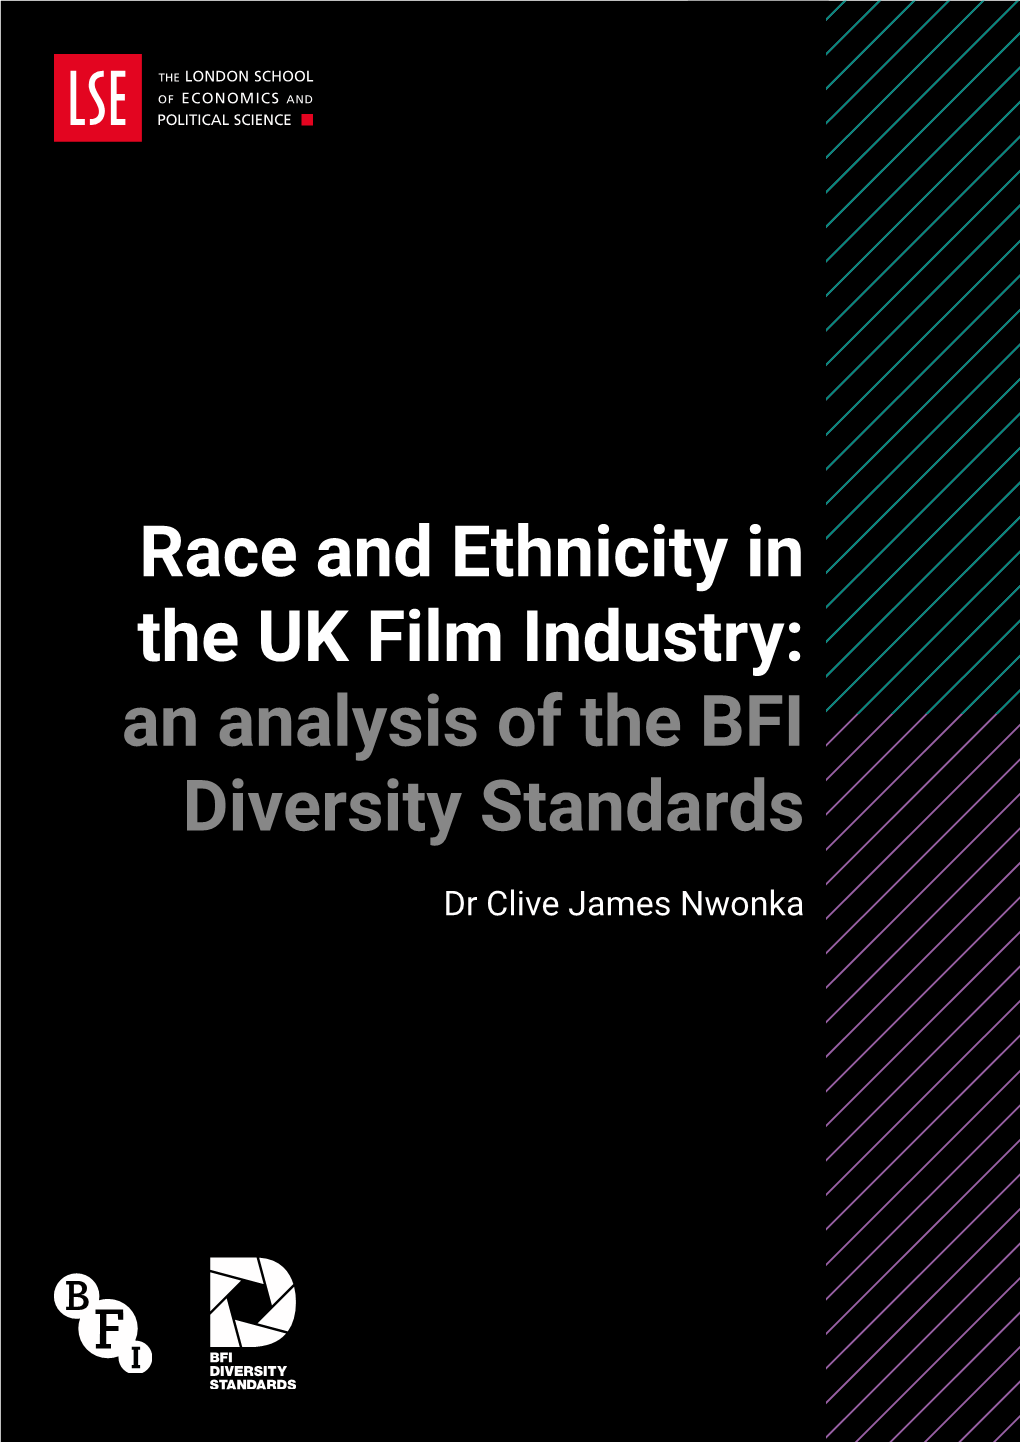 Race and Ethnicity in the UK Film Industry: an Analysis of the BFI Diversity Standards